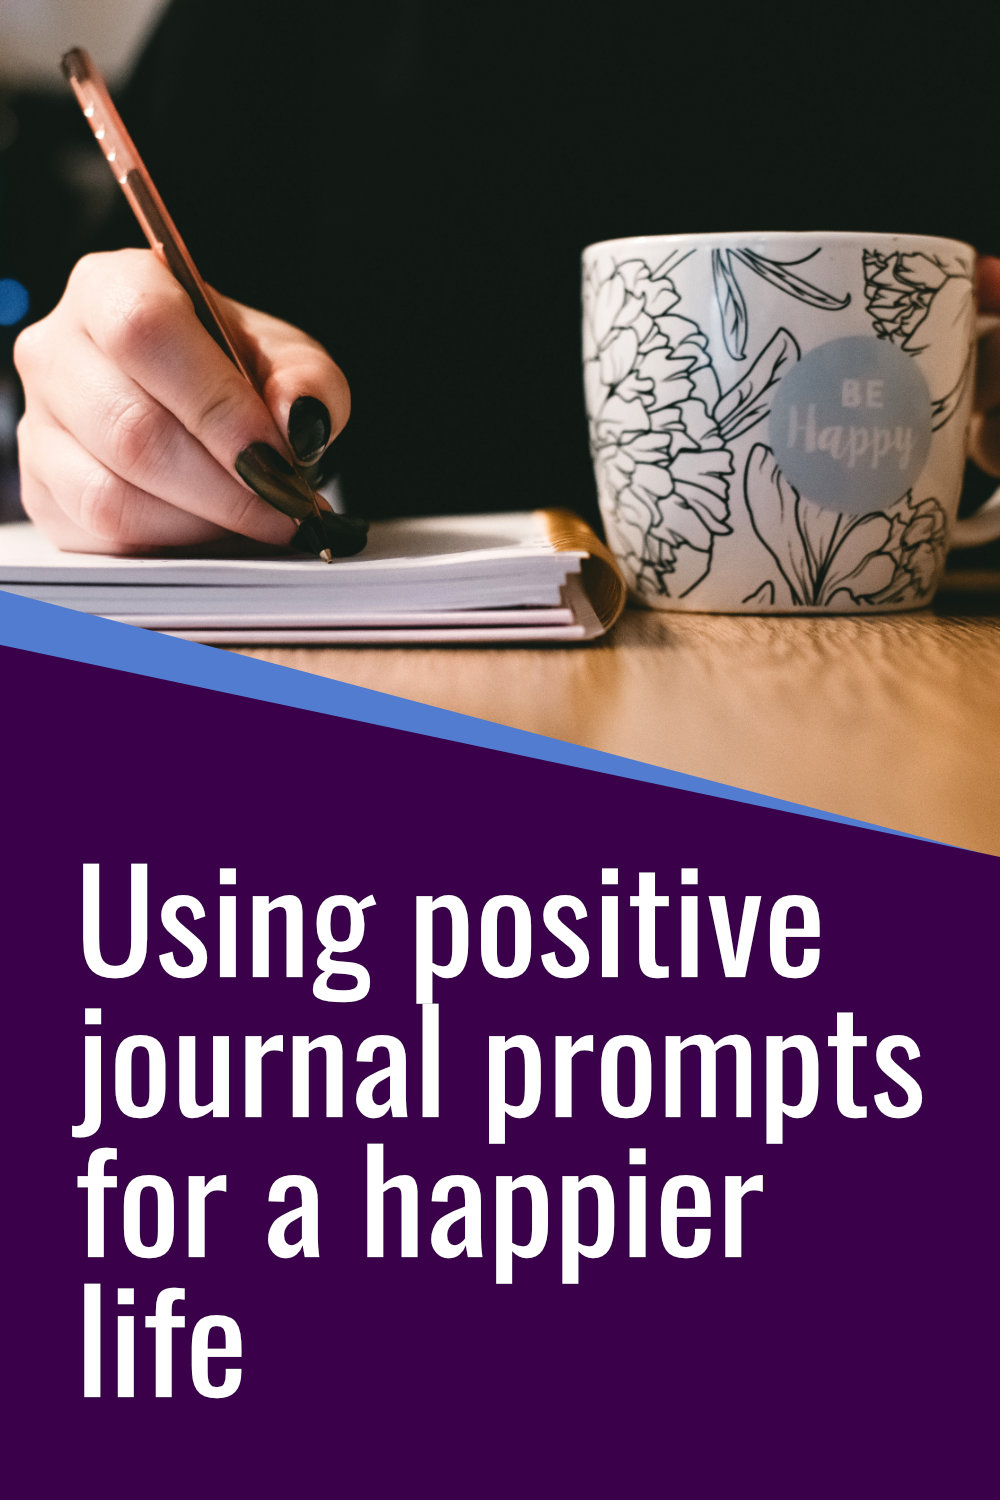 social media image that says using positive journal prompts for a happier life